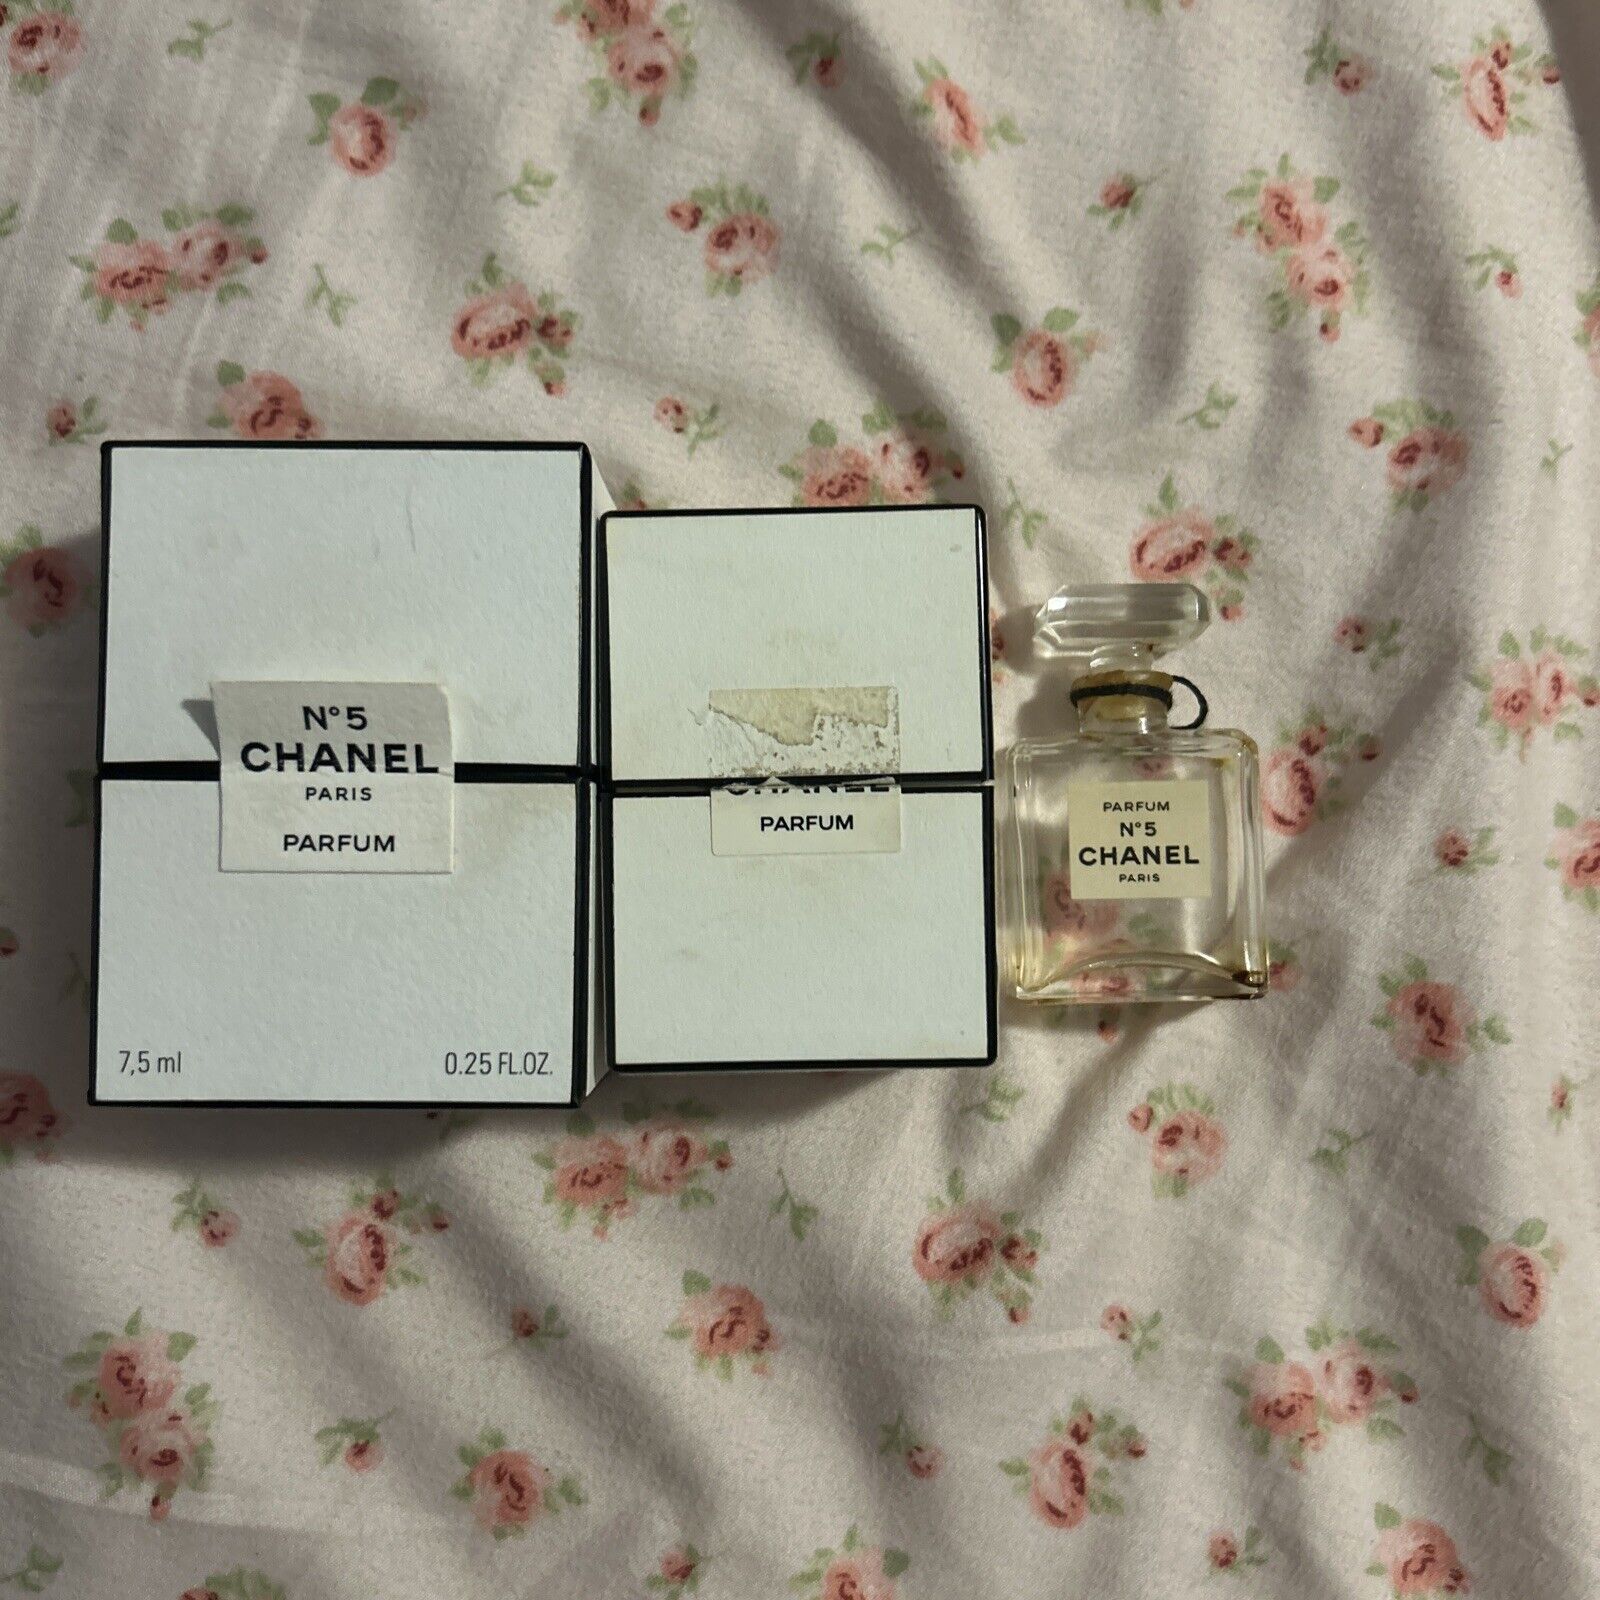 Vintage Chanel No 5 Perfume Bottle Made In France, 3 Empty Bottles, Two Boxes